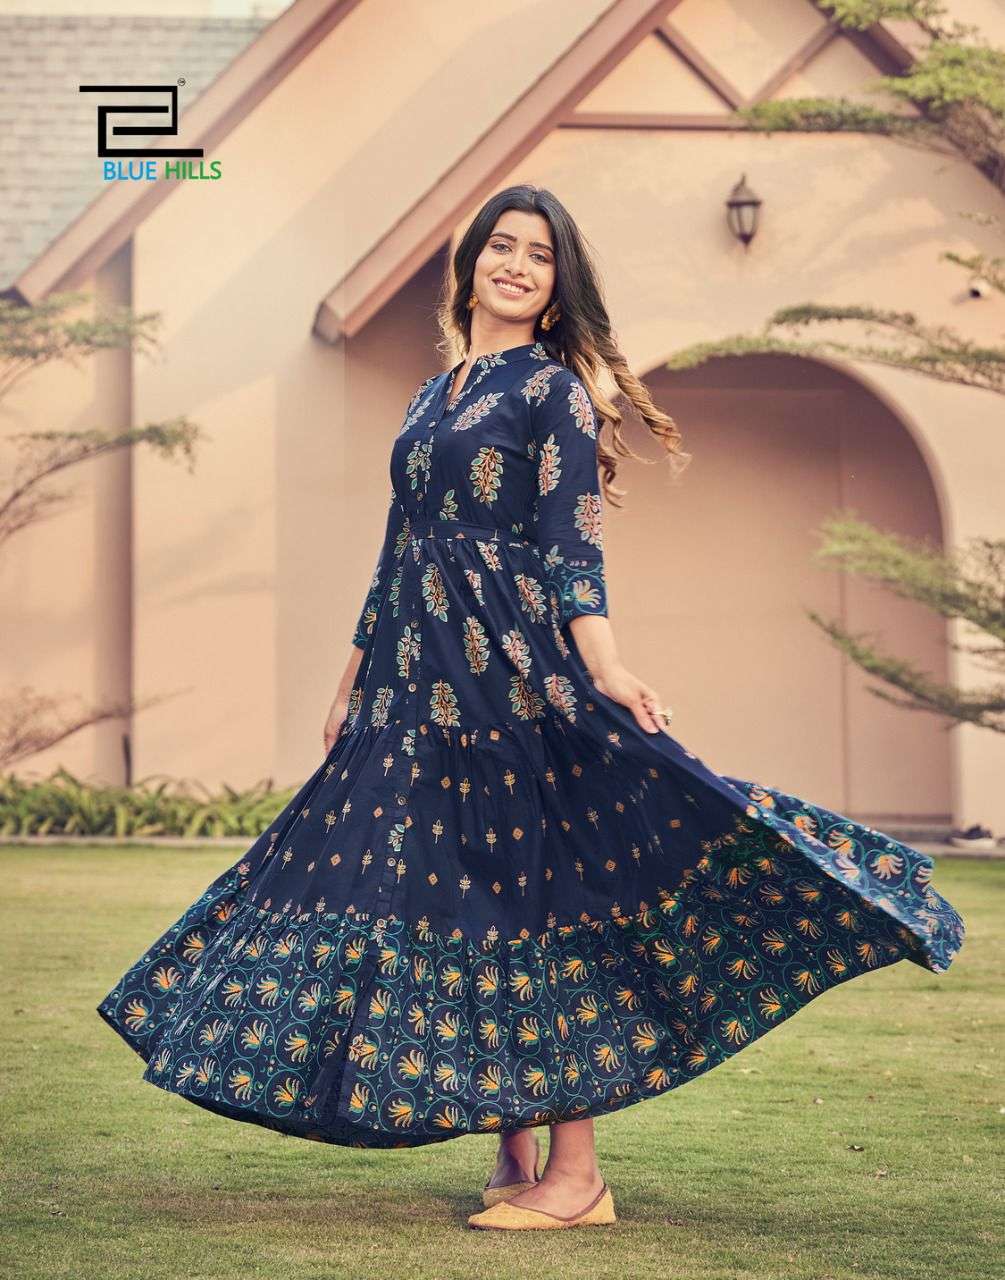 BLUE HILLS FLORENCIA VOL 3 DESIGNER COTTON CAMBRIC FULL FLAIR GOWN KURTI IN WHOLESALE RATE 